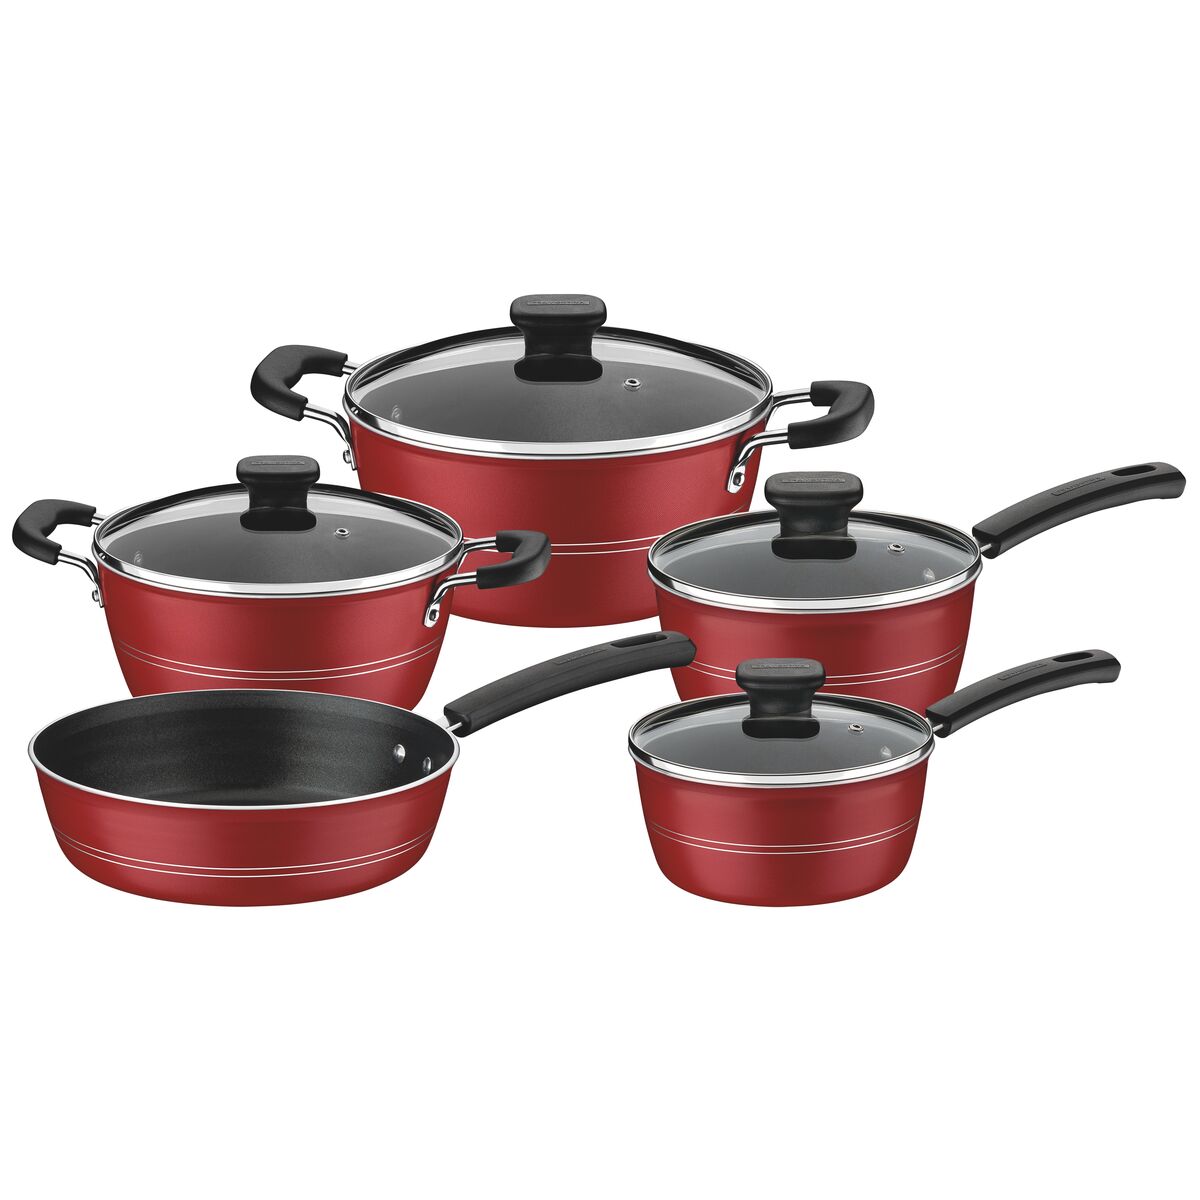 Tramontina Sicília Red Aluminum Cookware Set with Interior and Exterior Starflon Excellent Nonstick Coating, 5 pieces